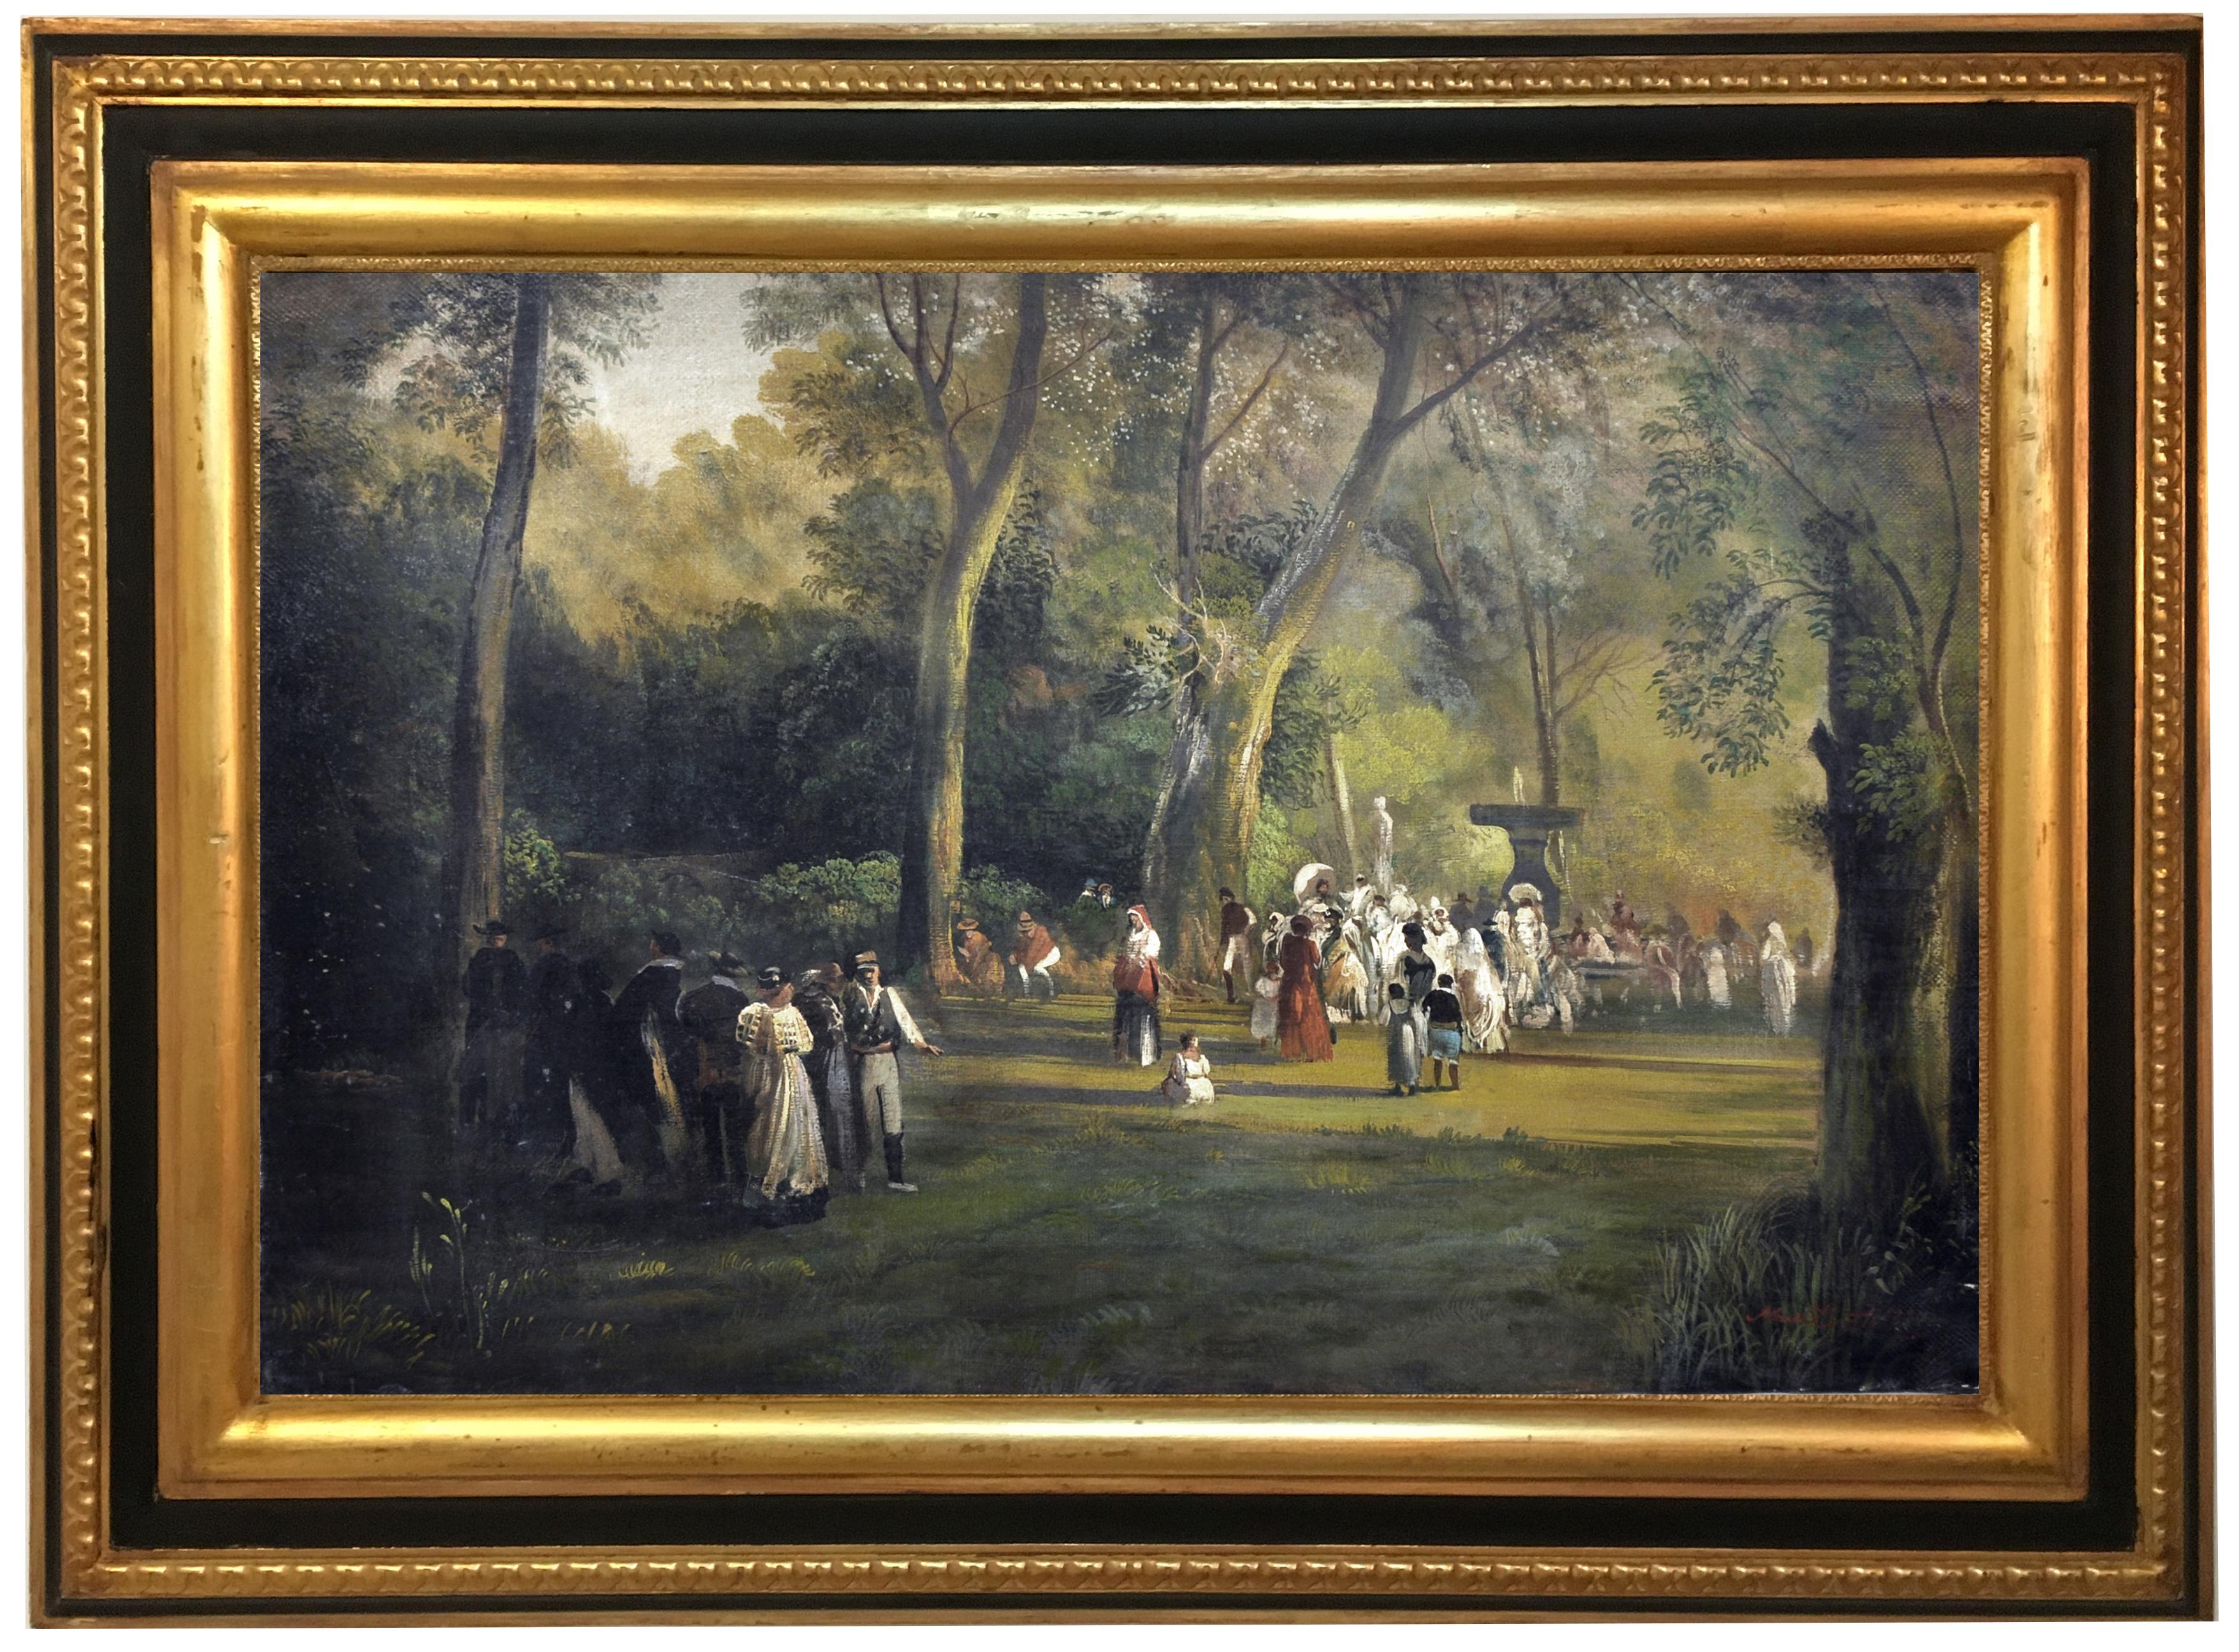 Landscape - Mario Locatelli Italia 2004 - Oil on canvas cm.60x90
Gold leaf gilded wooden frame available on request
Mario Locatelli’s painting depicts a rural scene, of an authentic social nature, a noisy and worldly party in the woods. Locatelli is